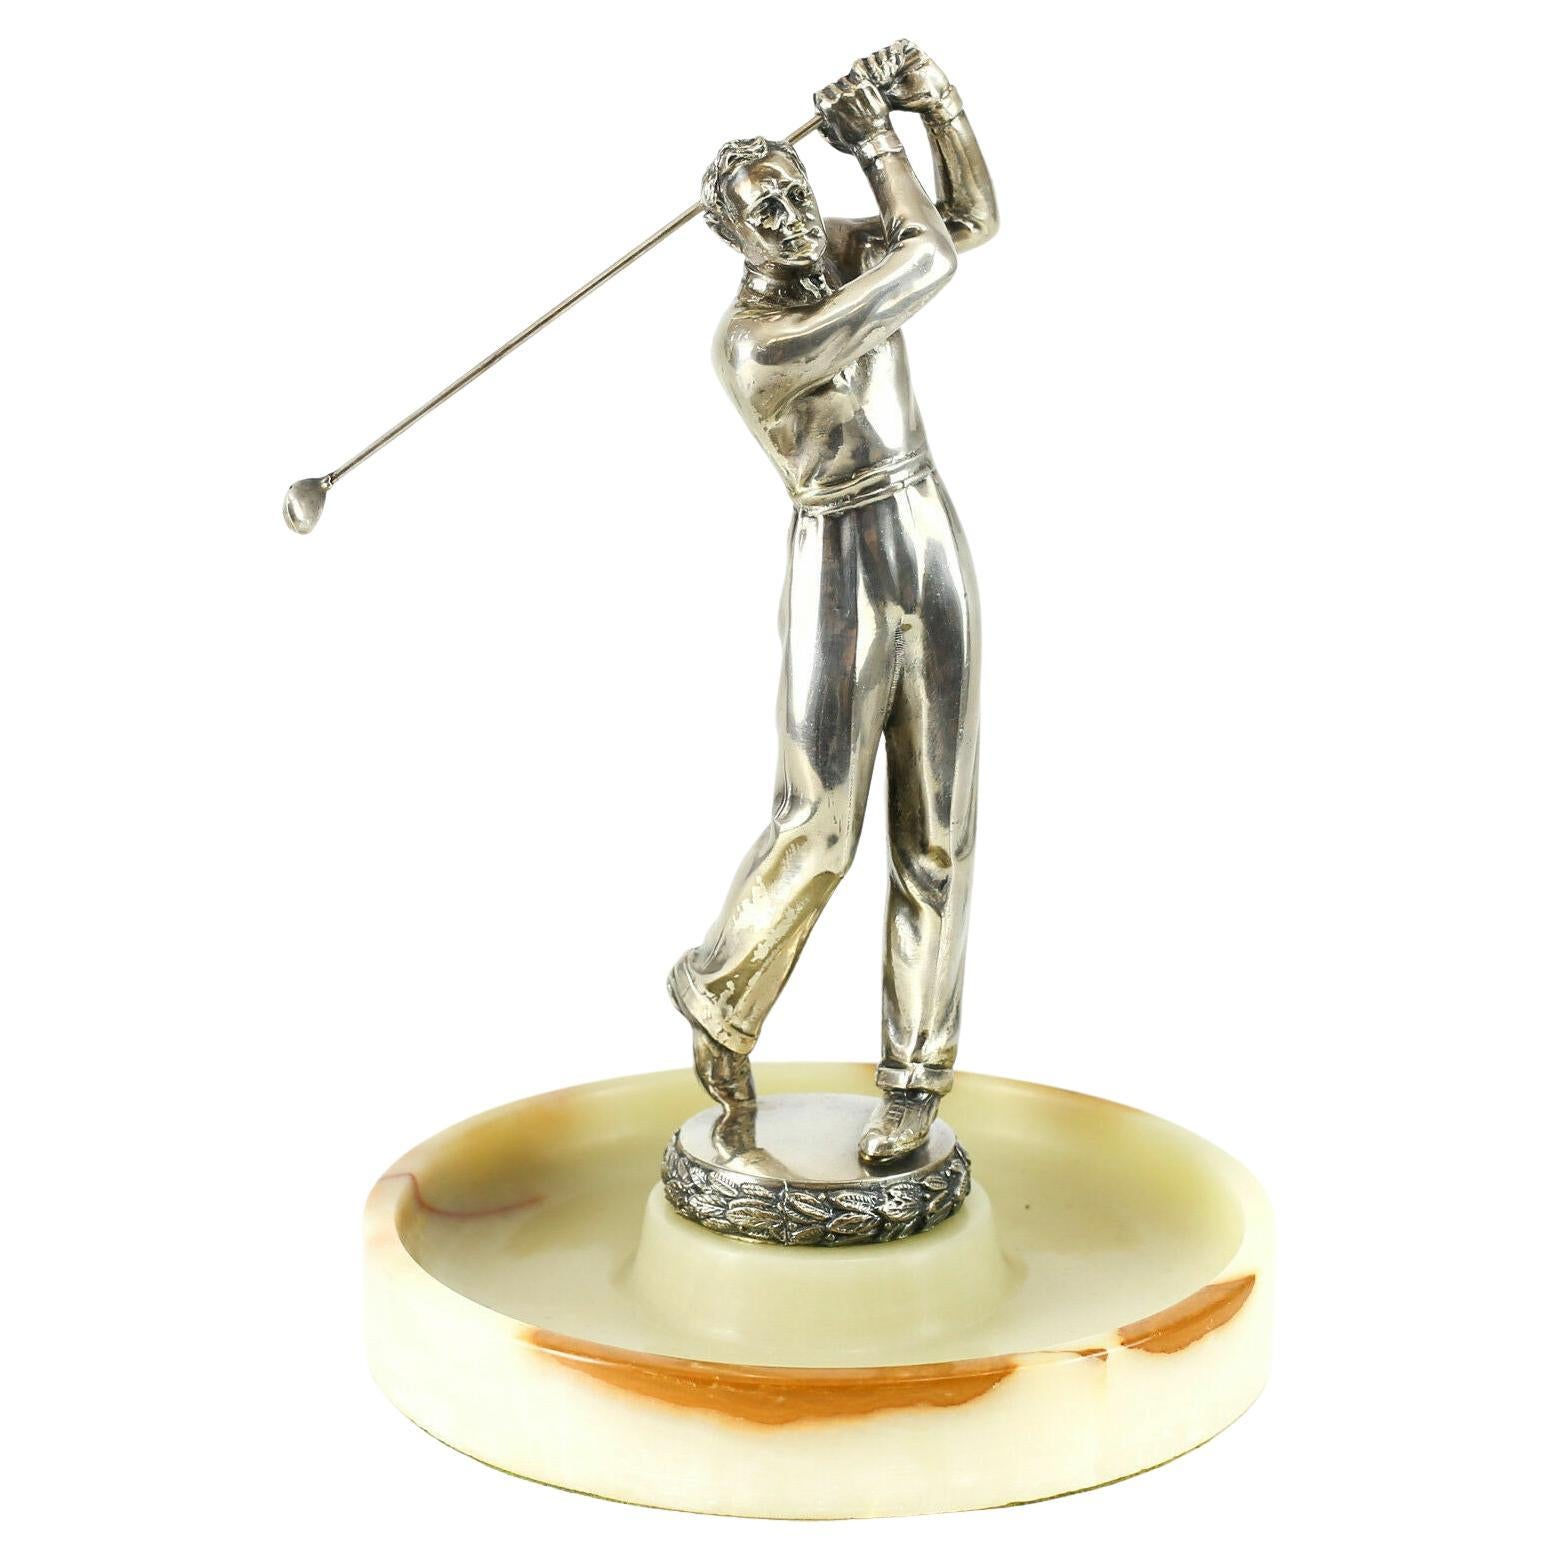 American Hand Chased Silverplate Golf Figurine Desk Caddy Marble Base, c1930